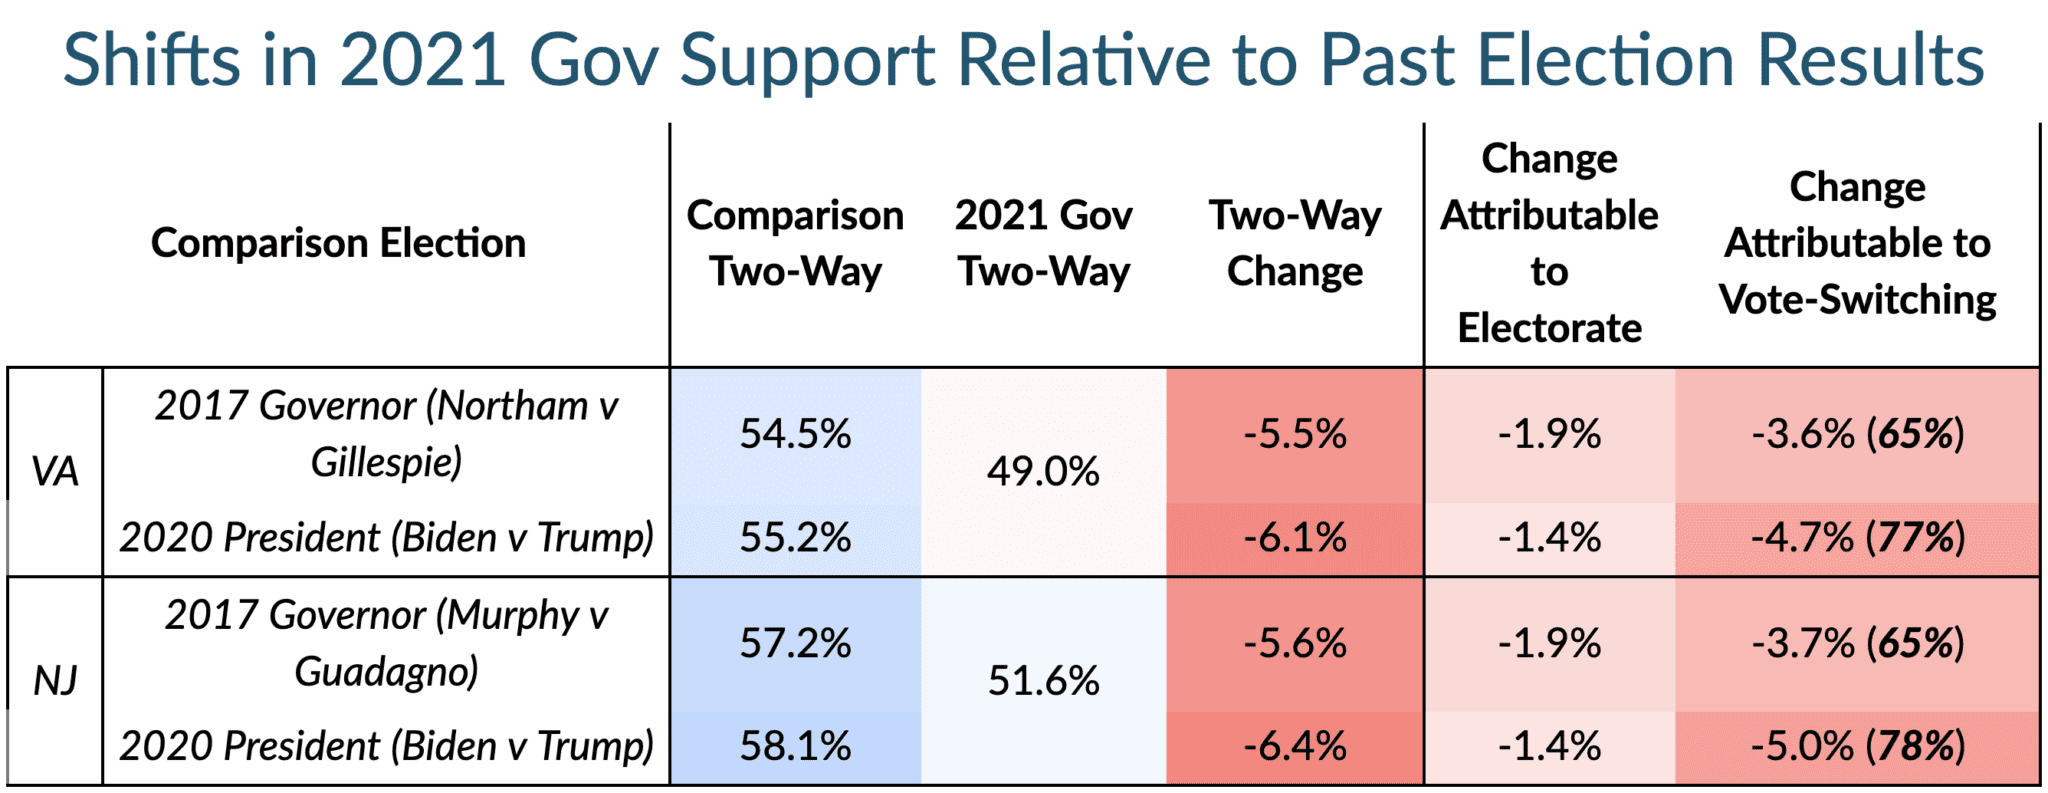 Table showing Shifts in 2021 Gov Support Relative to Past Election Results